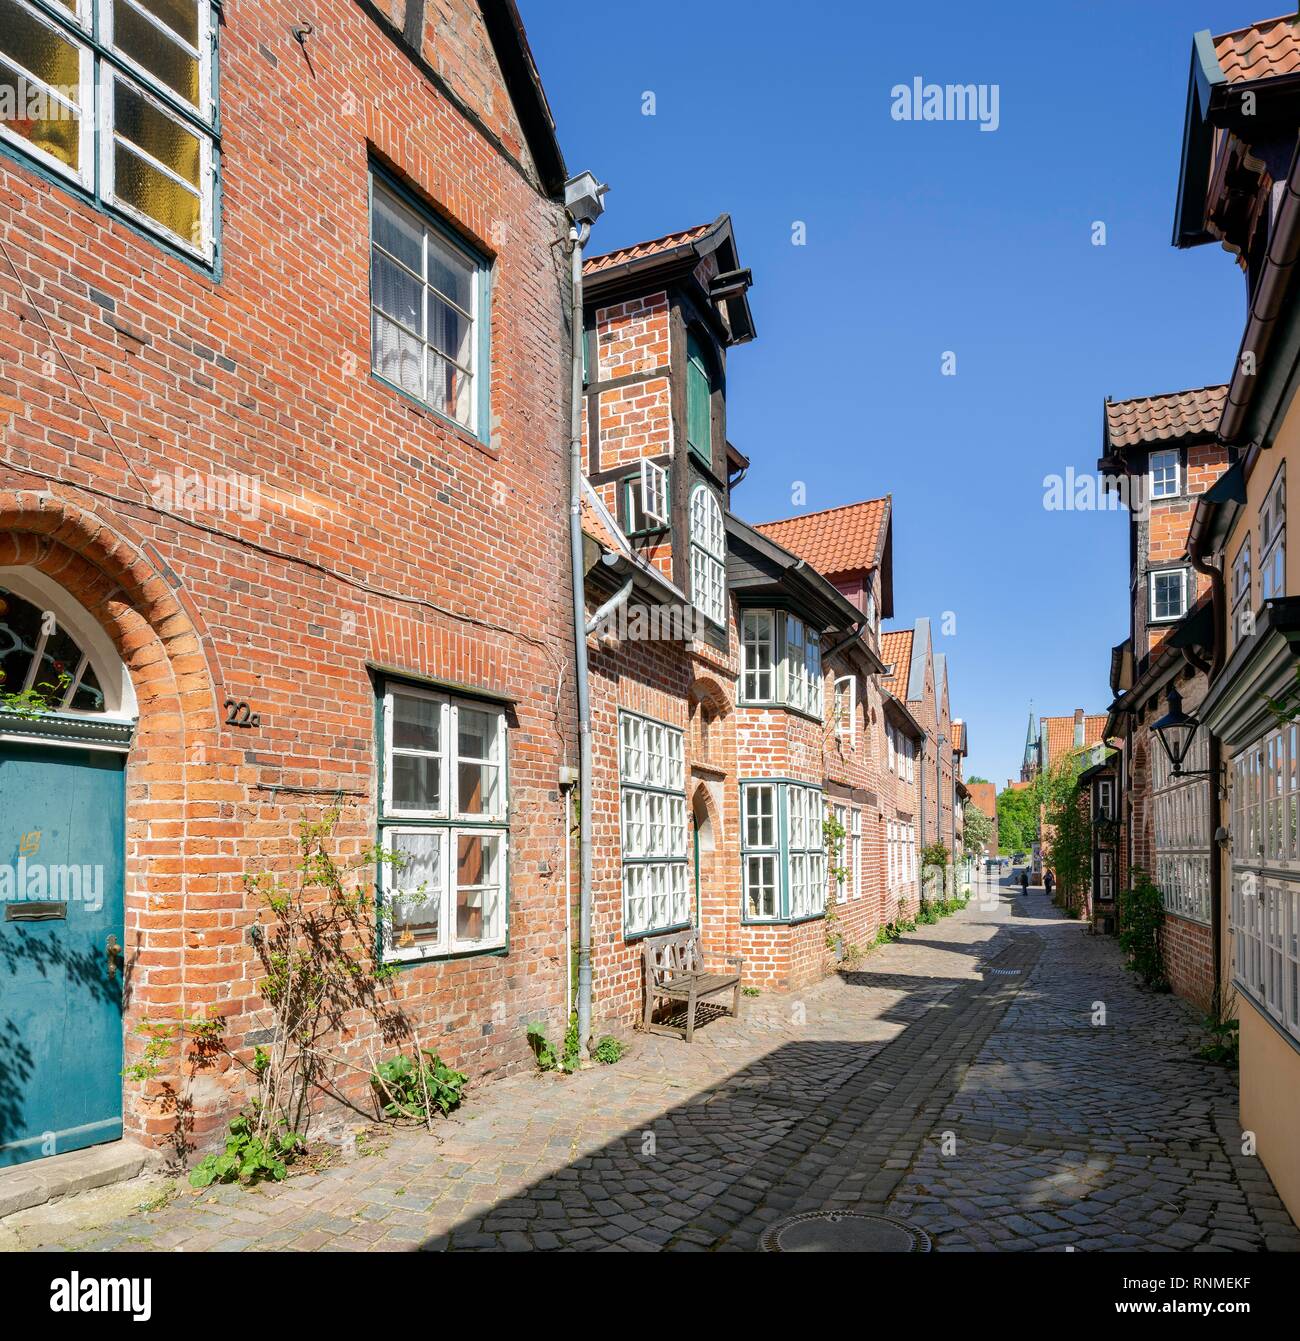 Historic town houses in the street Auf dem Meere, Old Town, Lüneburg, Lower Saxony, Germany Stock Photo